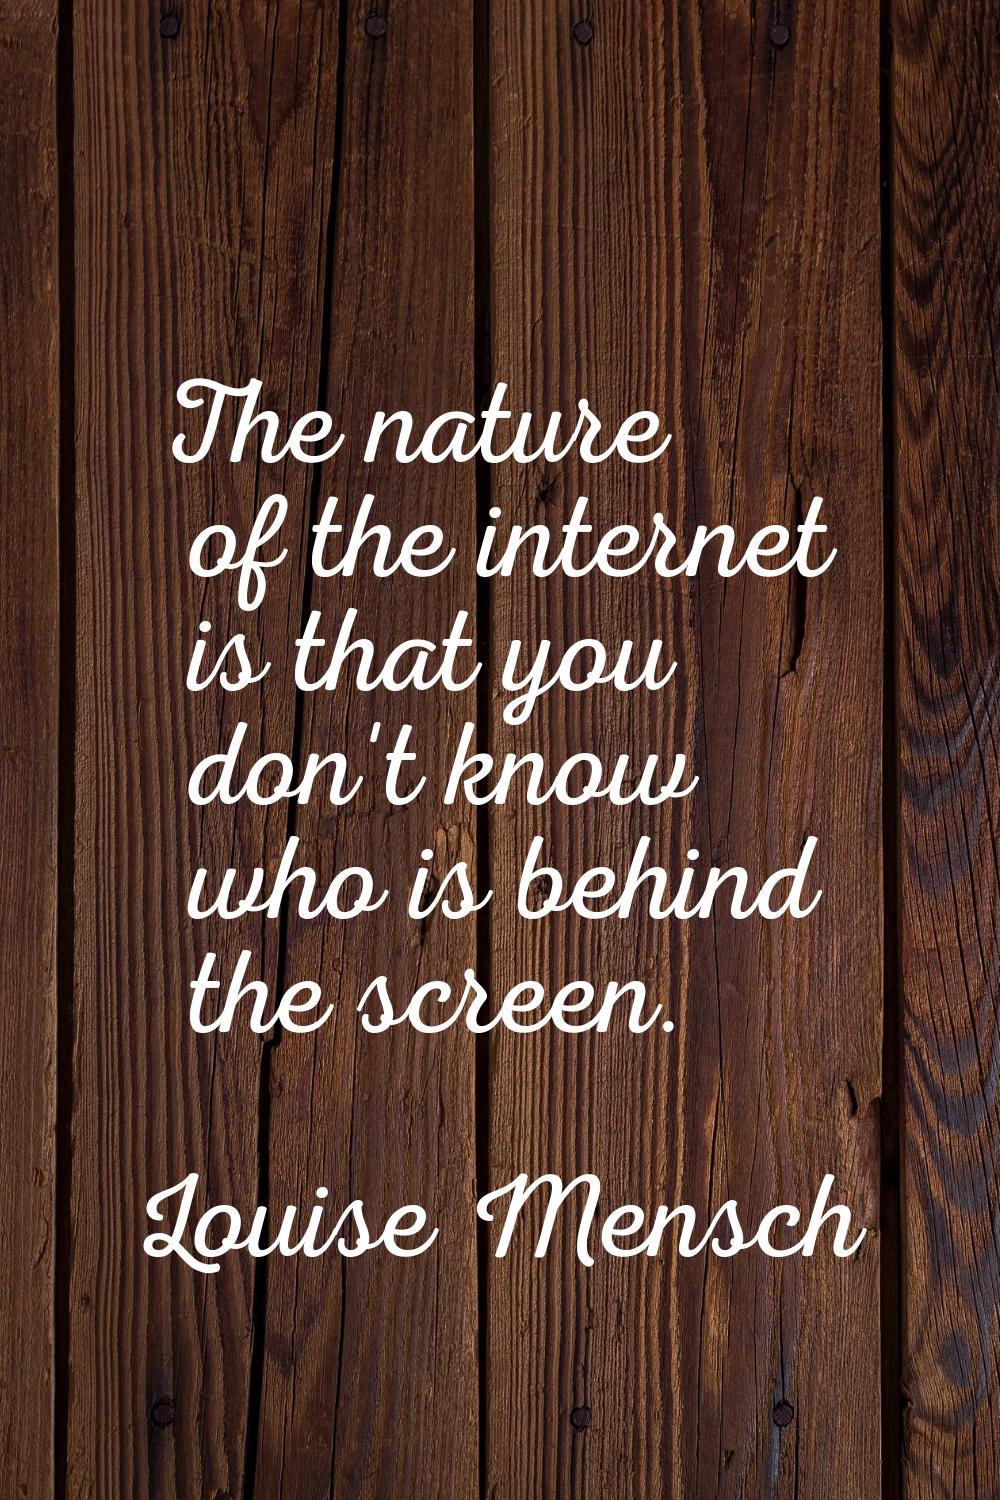 The nature of the internet is that you don't know who is behind the screen.